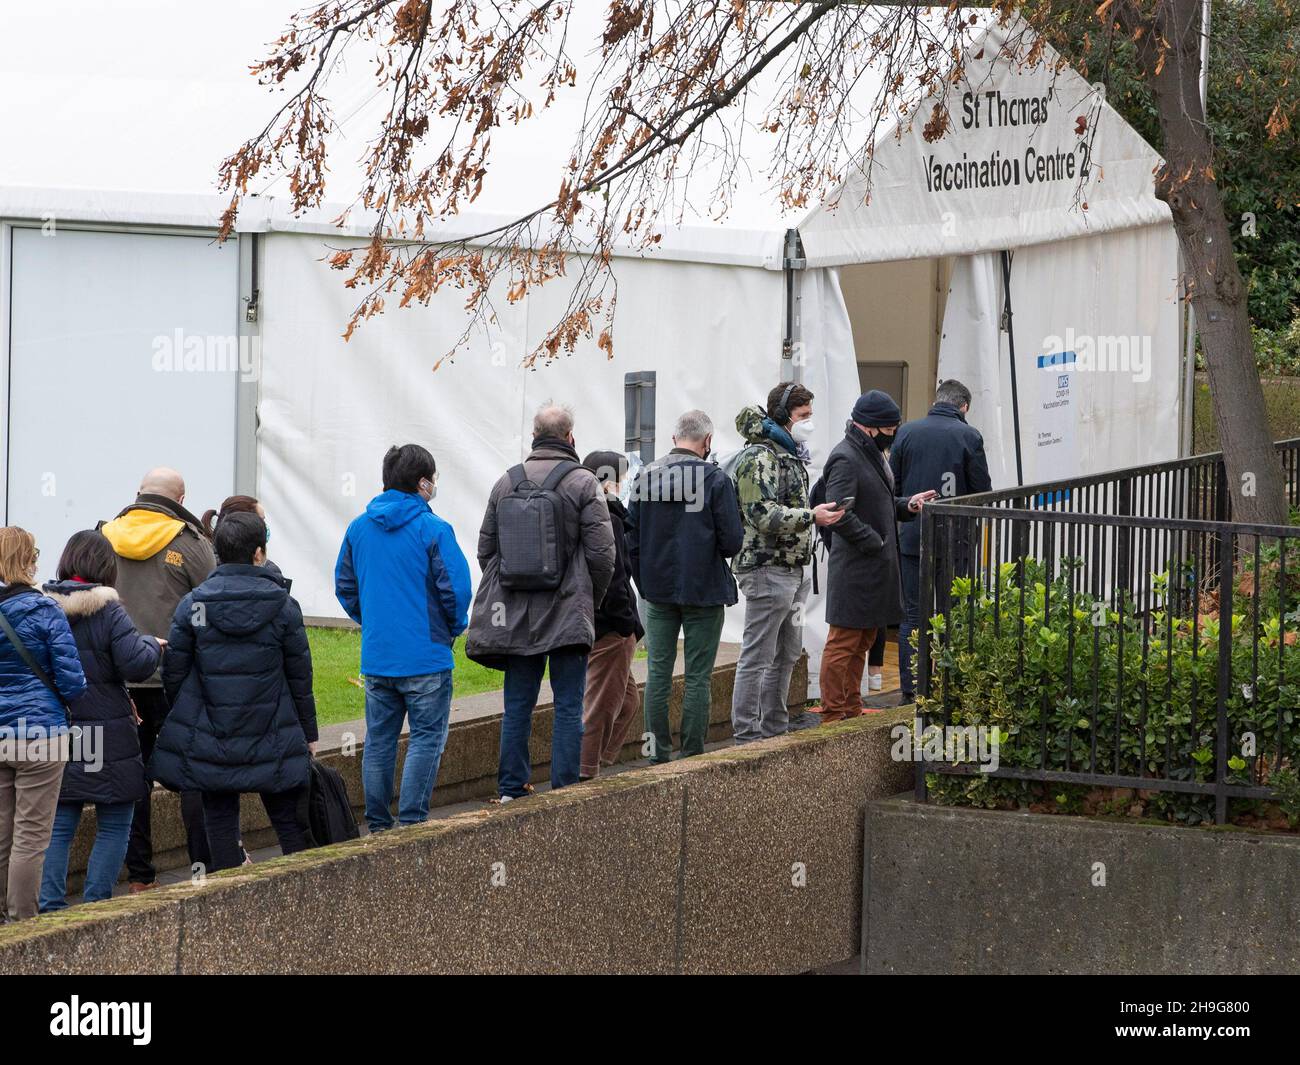 People queue outside St Thomas Hospital, South London to receive the Covid booster jab as the Omnicron variant takes hold in the UK. Stock Photo